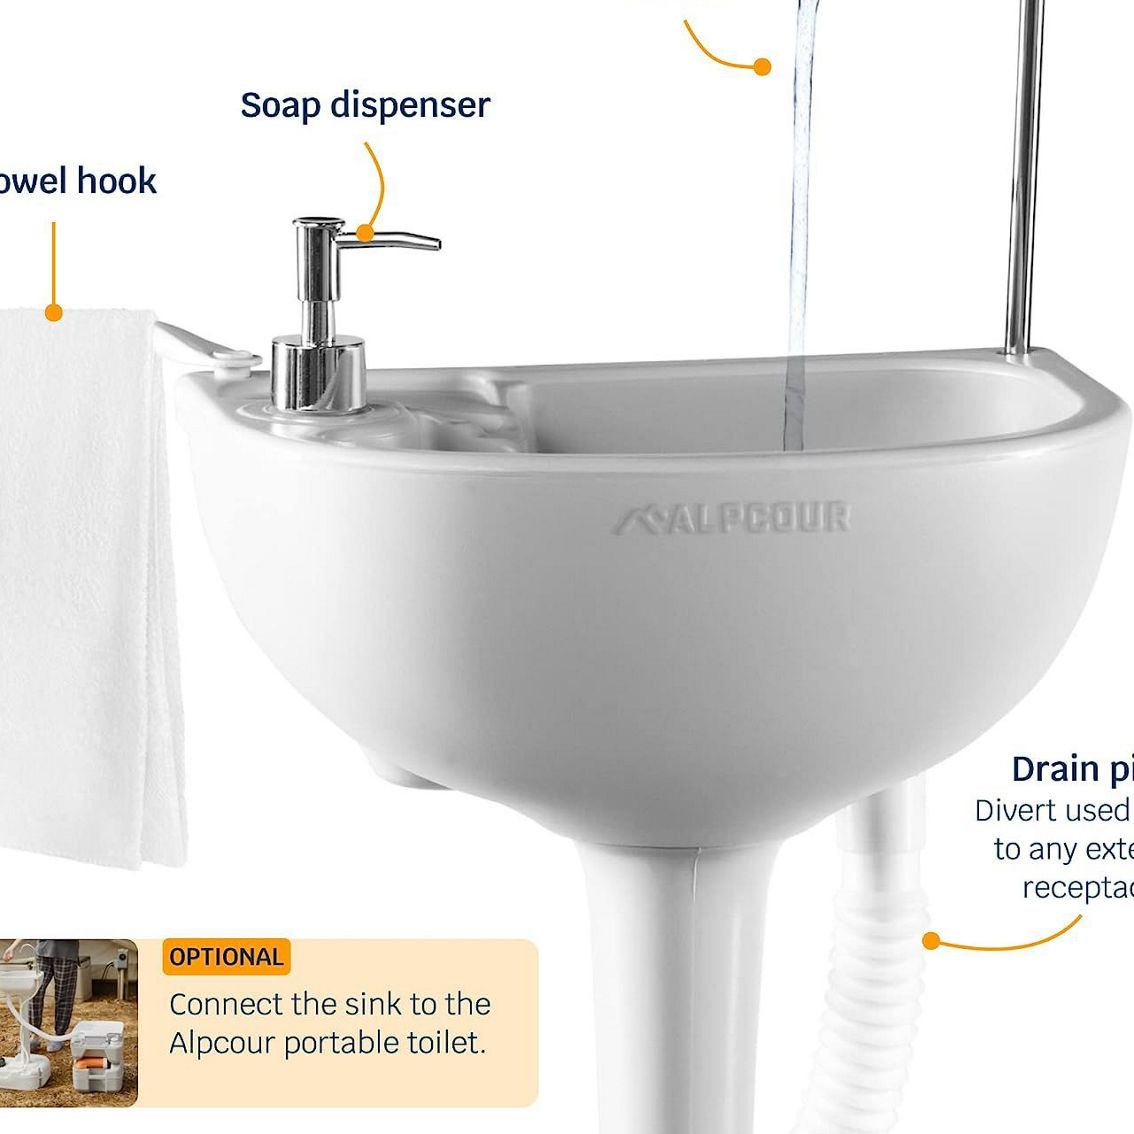 Alpcour Portable Camping Sink - Image 5 of 5